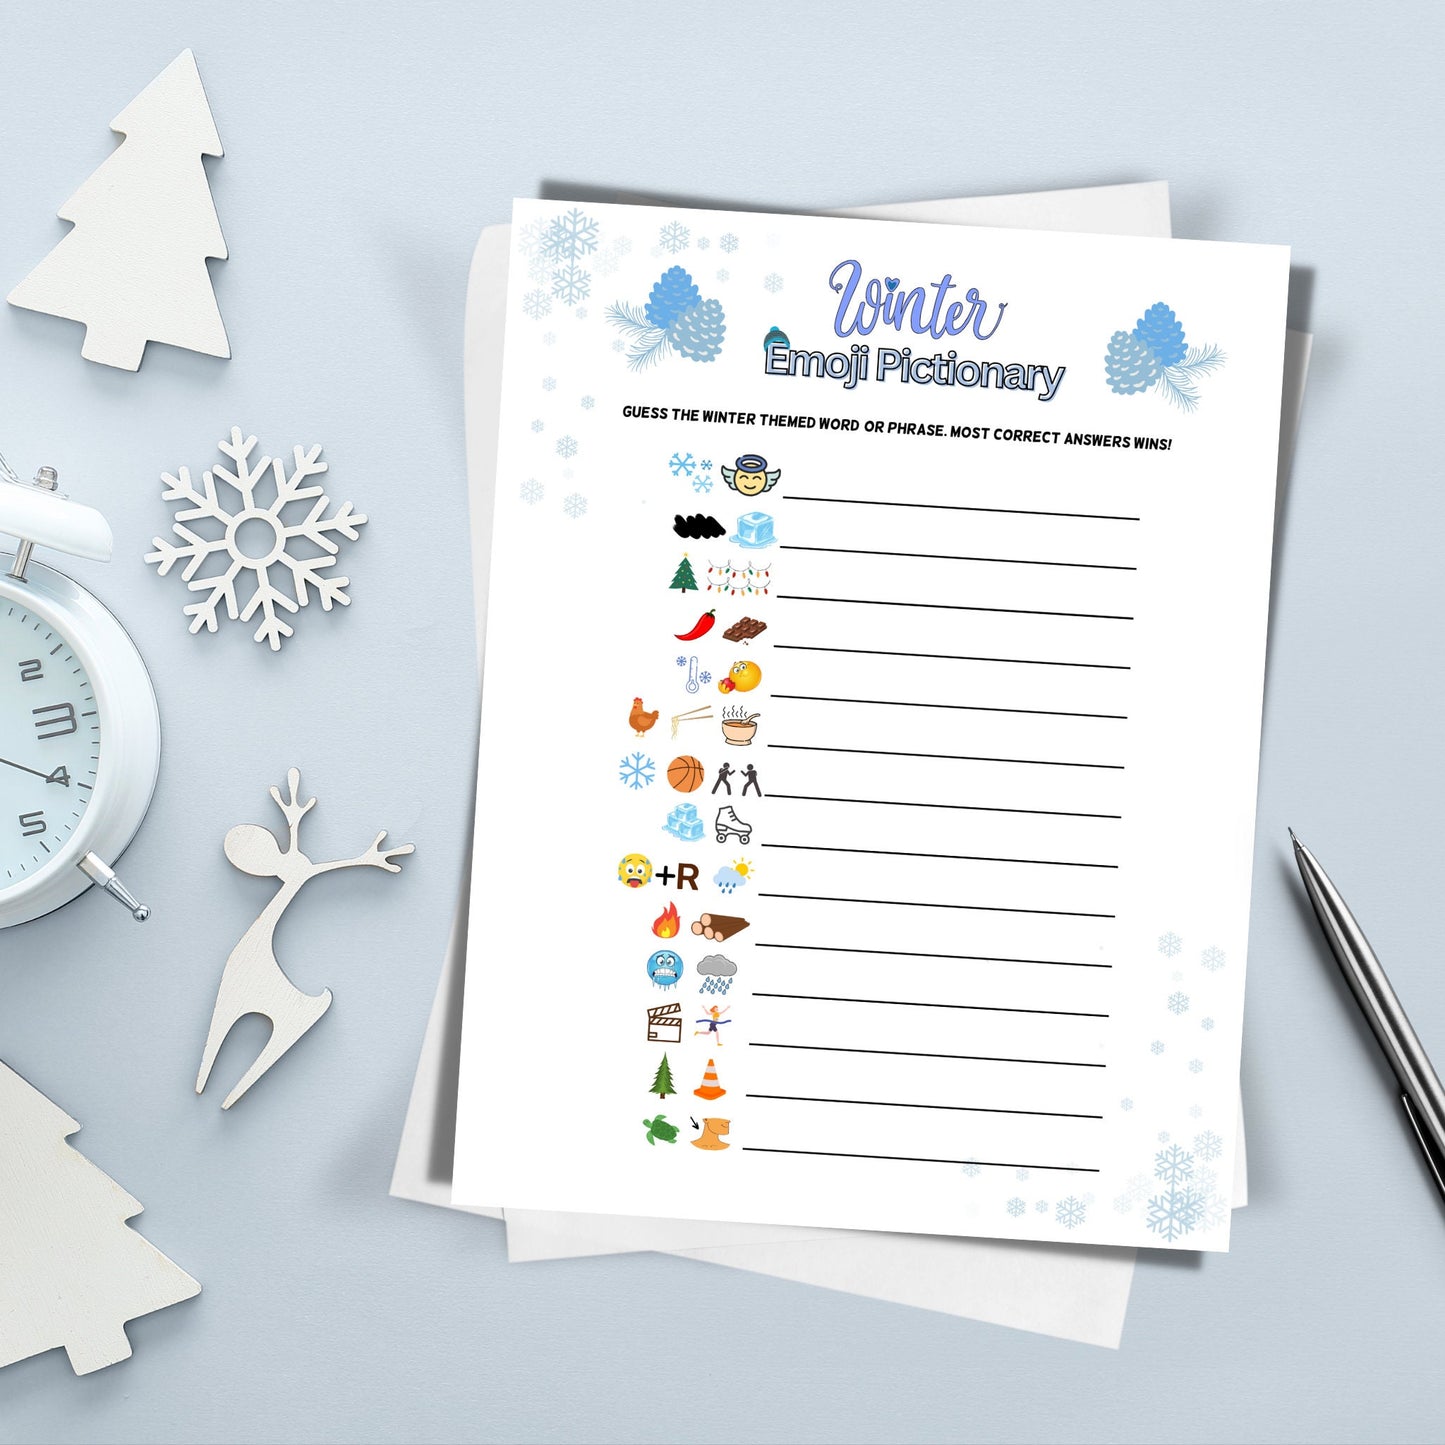 Winter Emoji Pictionary Game Printable, Holiday Party Games, Fun Winter Game, Winter Family Activity, For Kids & Adults, Christmas New Years